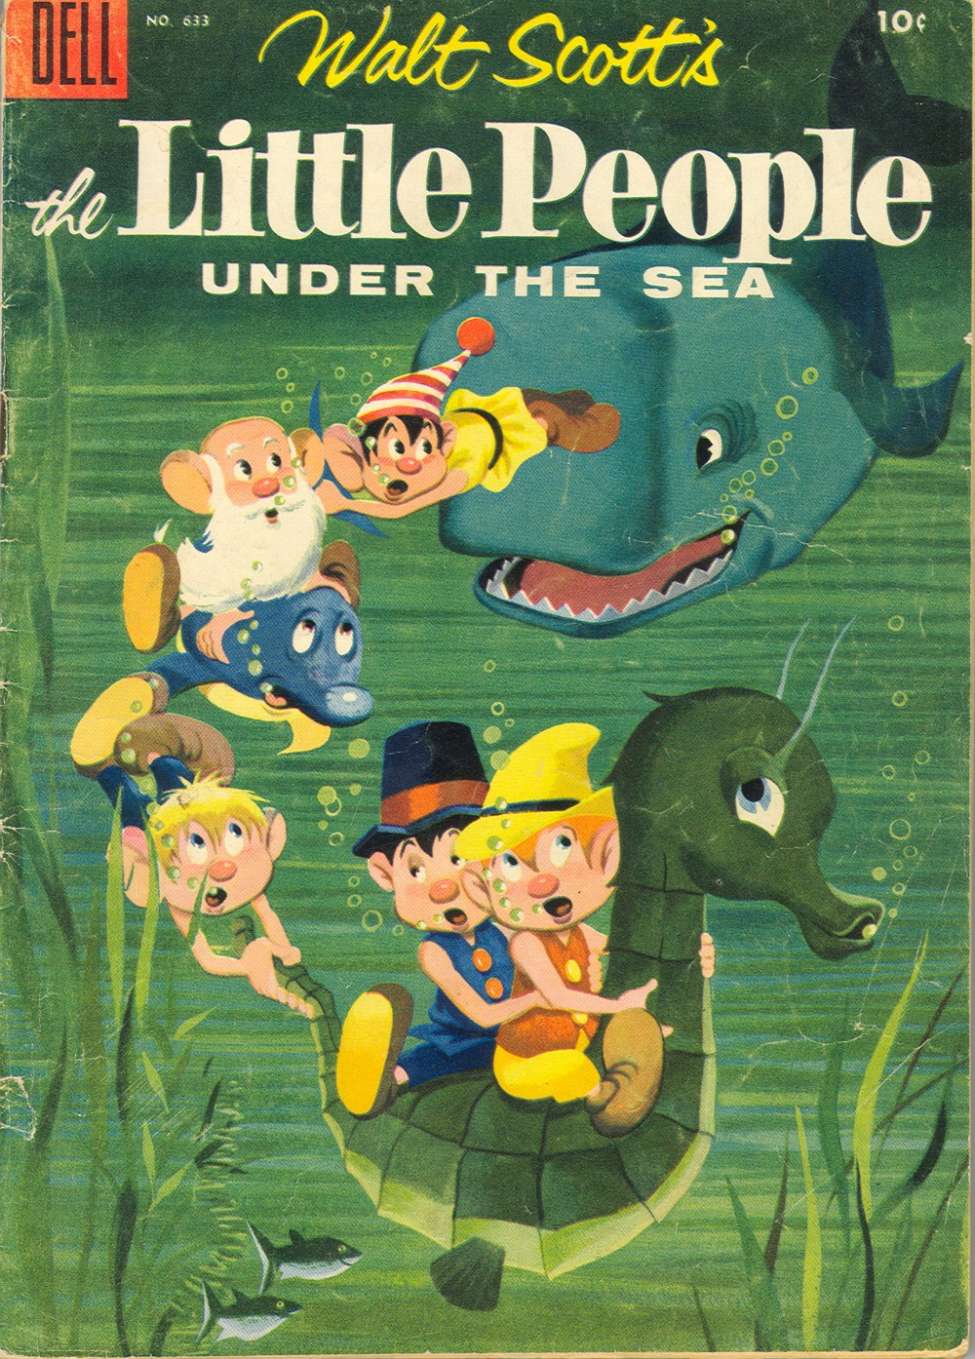 Book Cover For 0633 - Walt Scott's The Little People